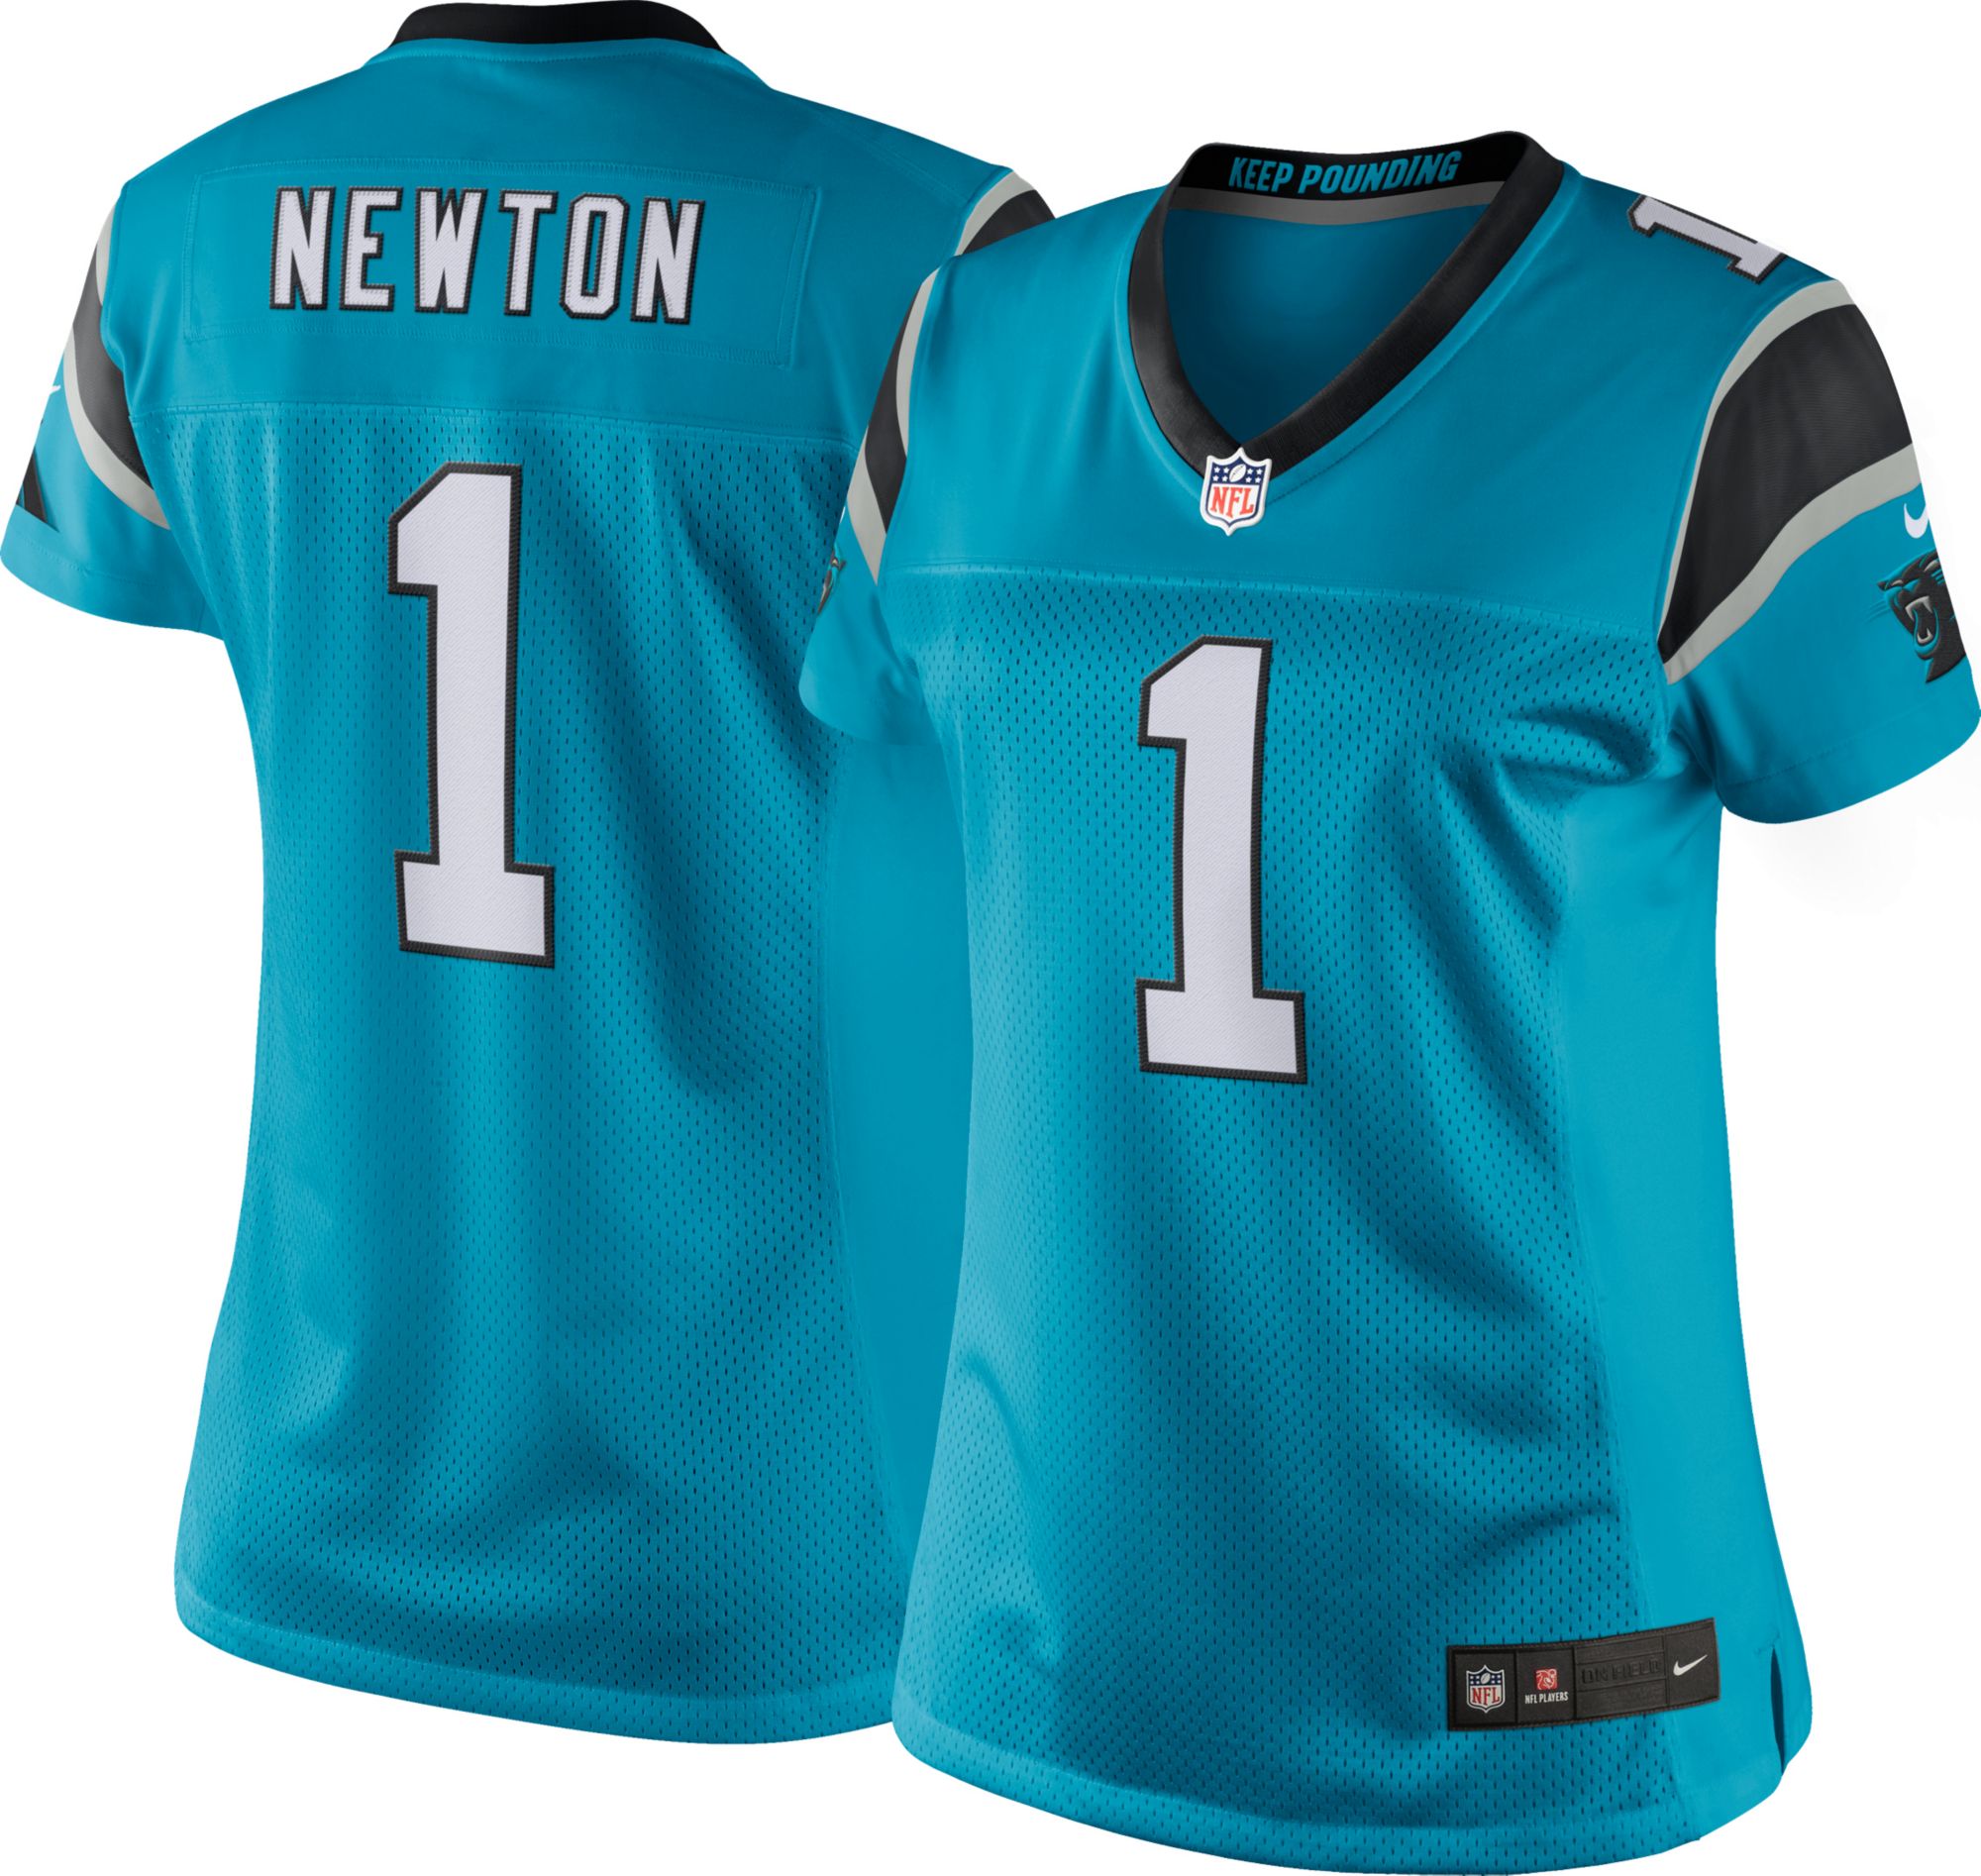 where can i find a cam newton jersey